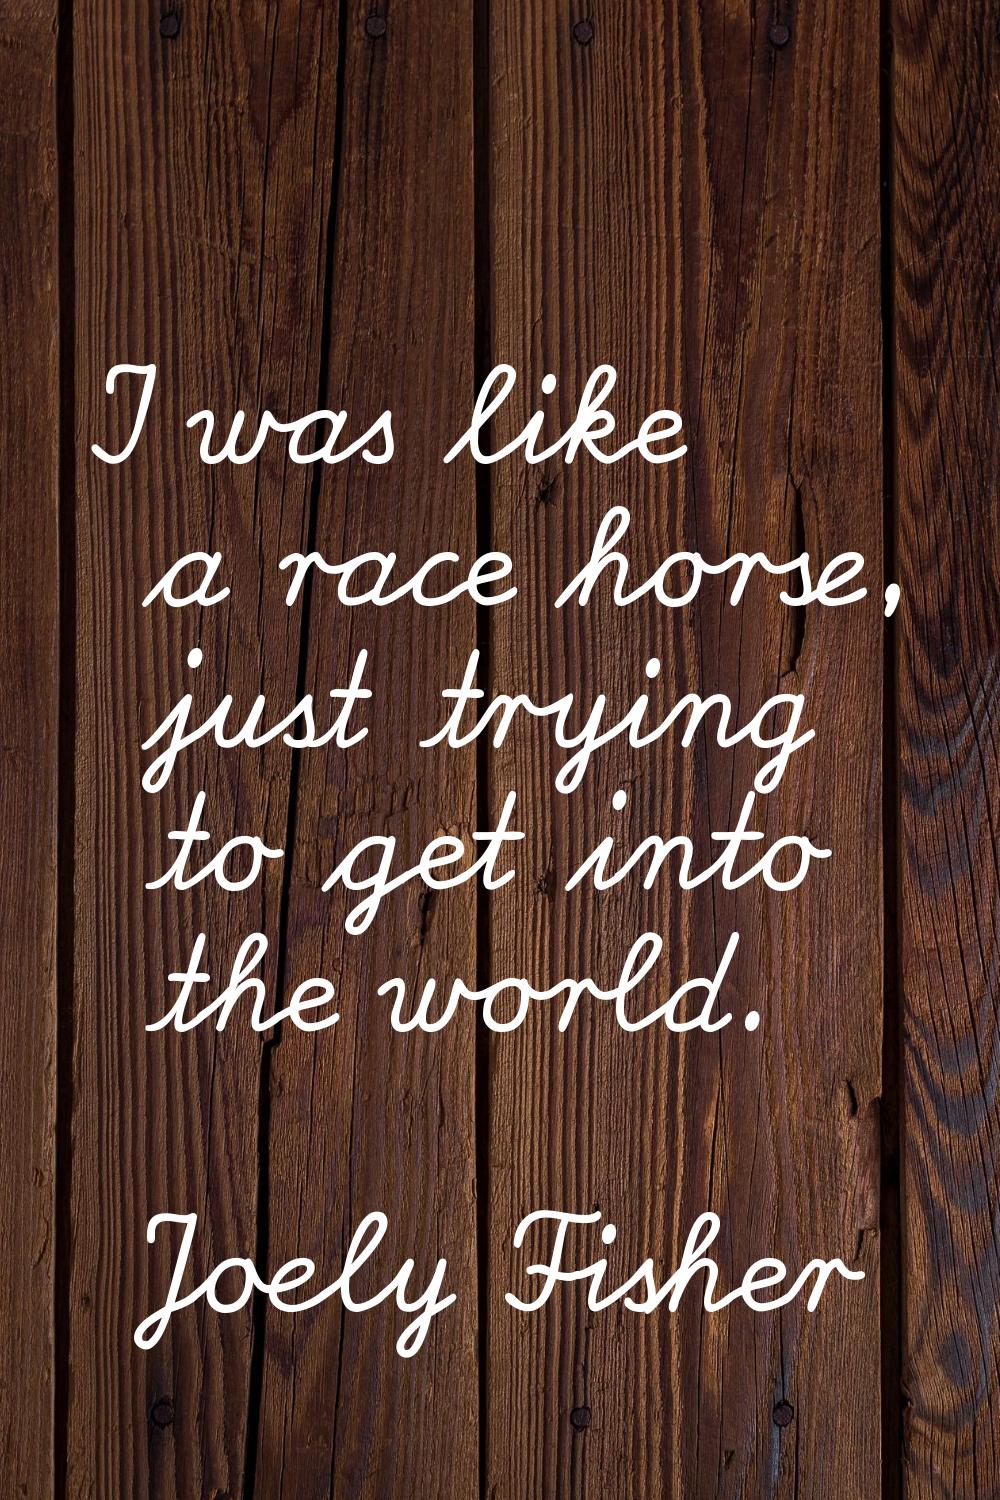 I was like a race horse, just trying to get into the world.